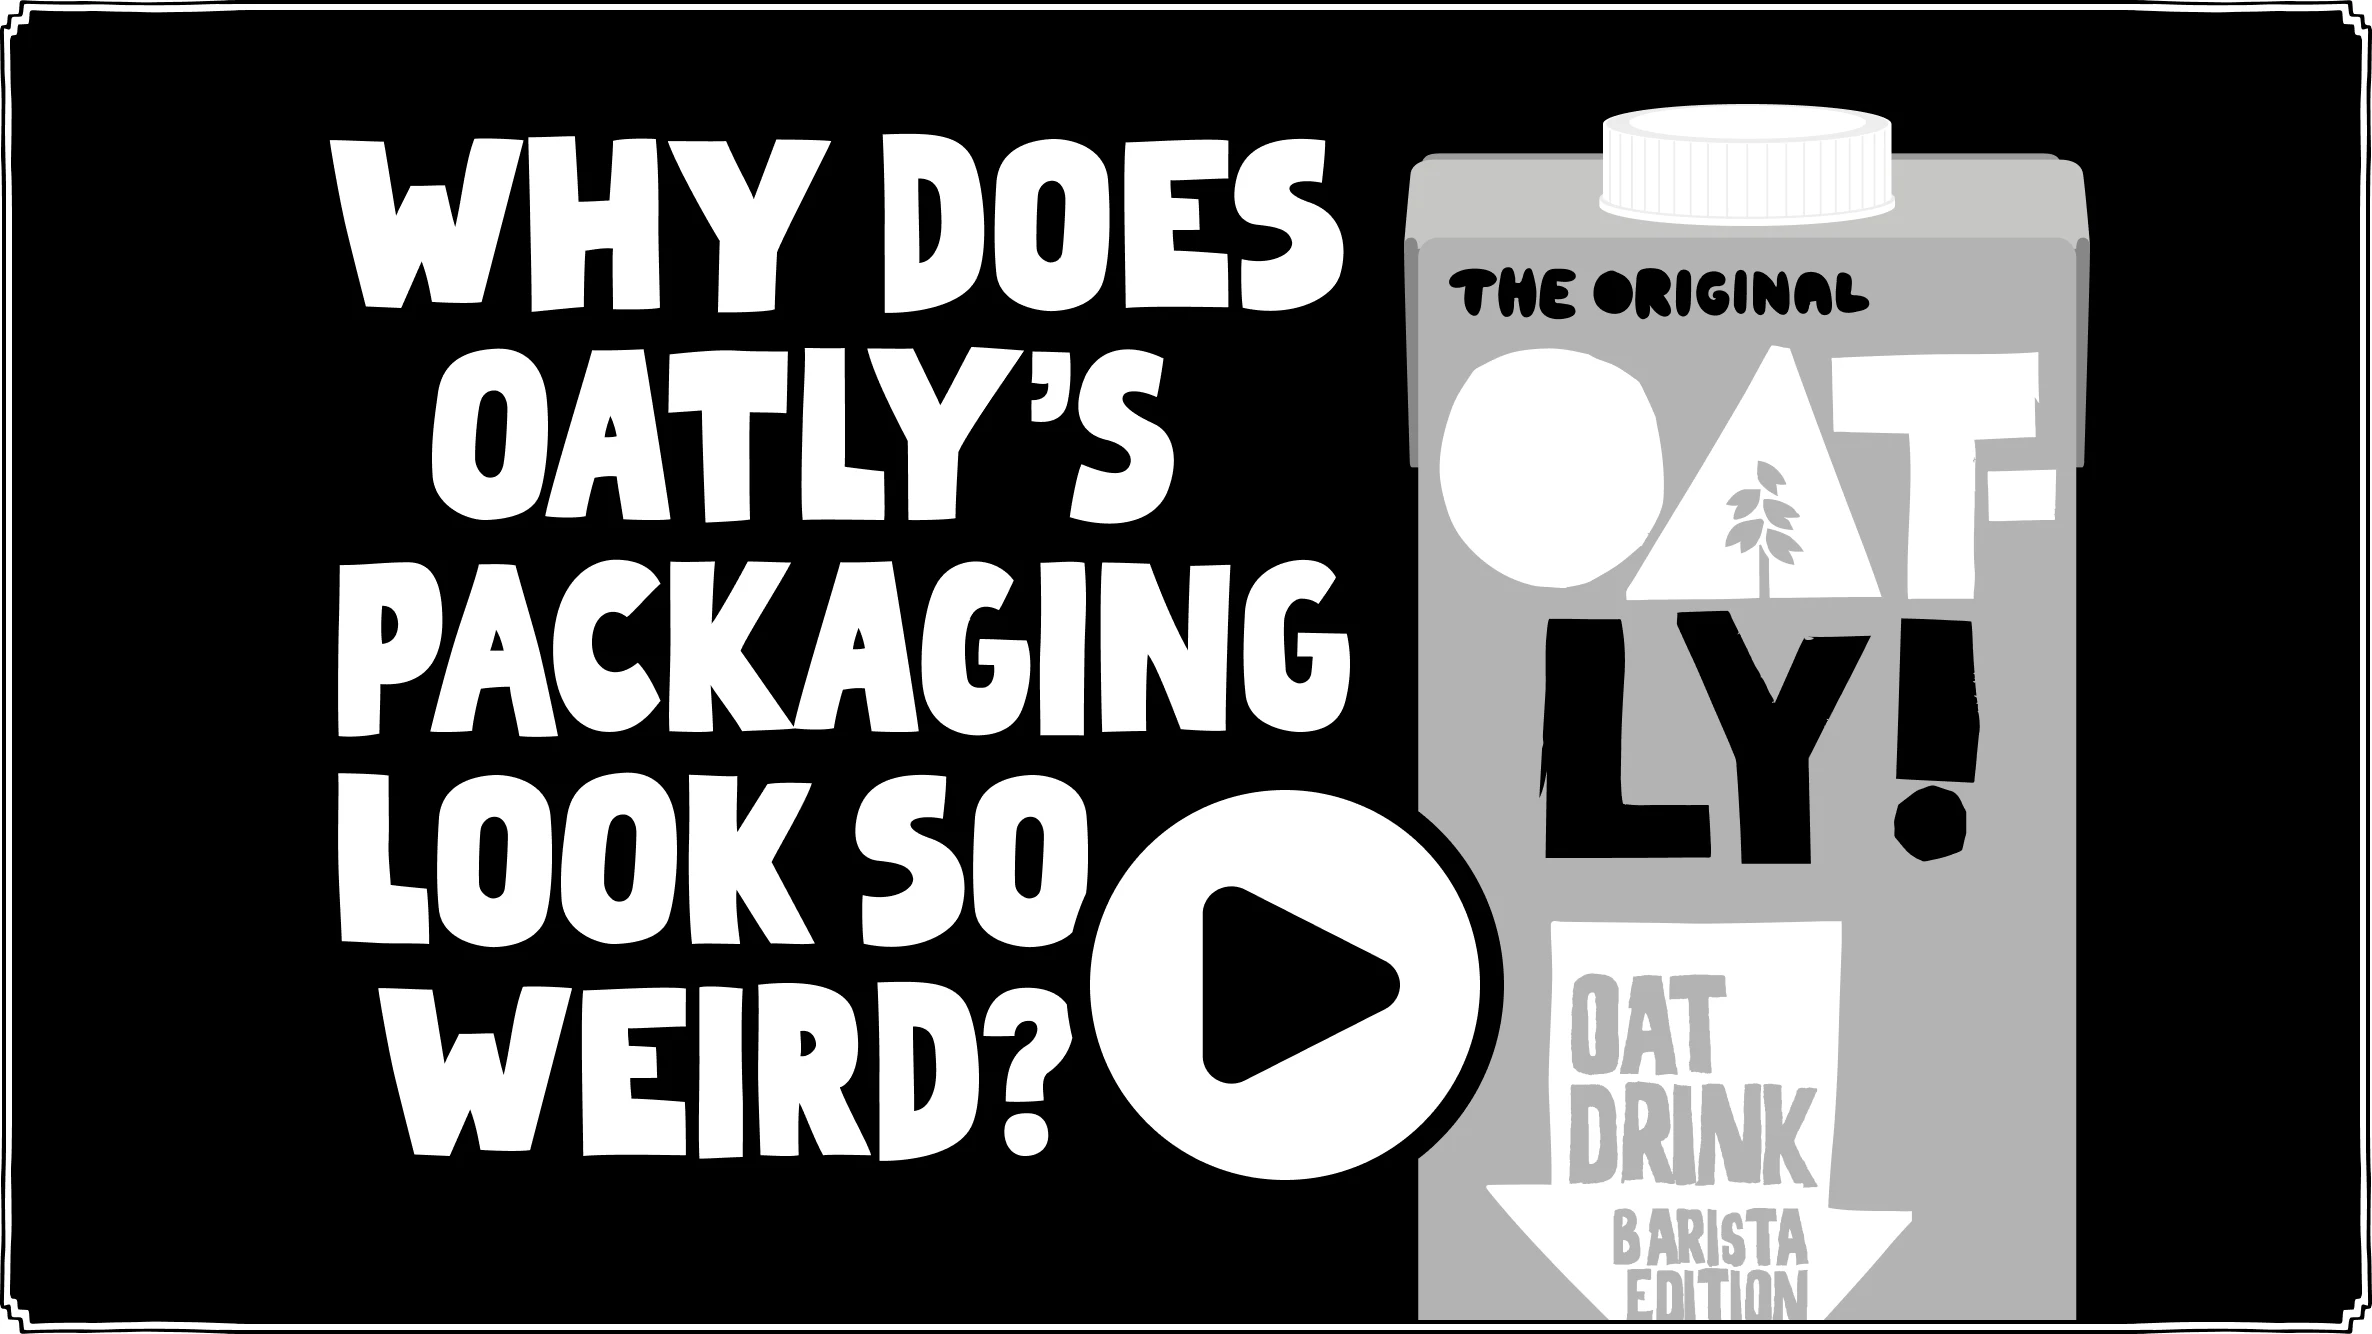 Why Does Oatly's Packaging Look So Weird?